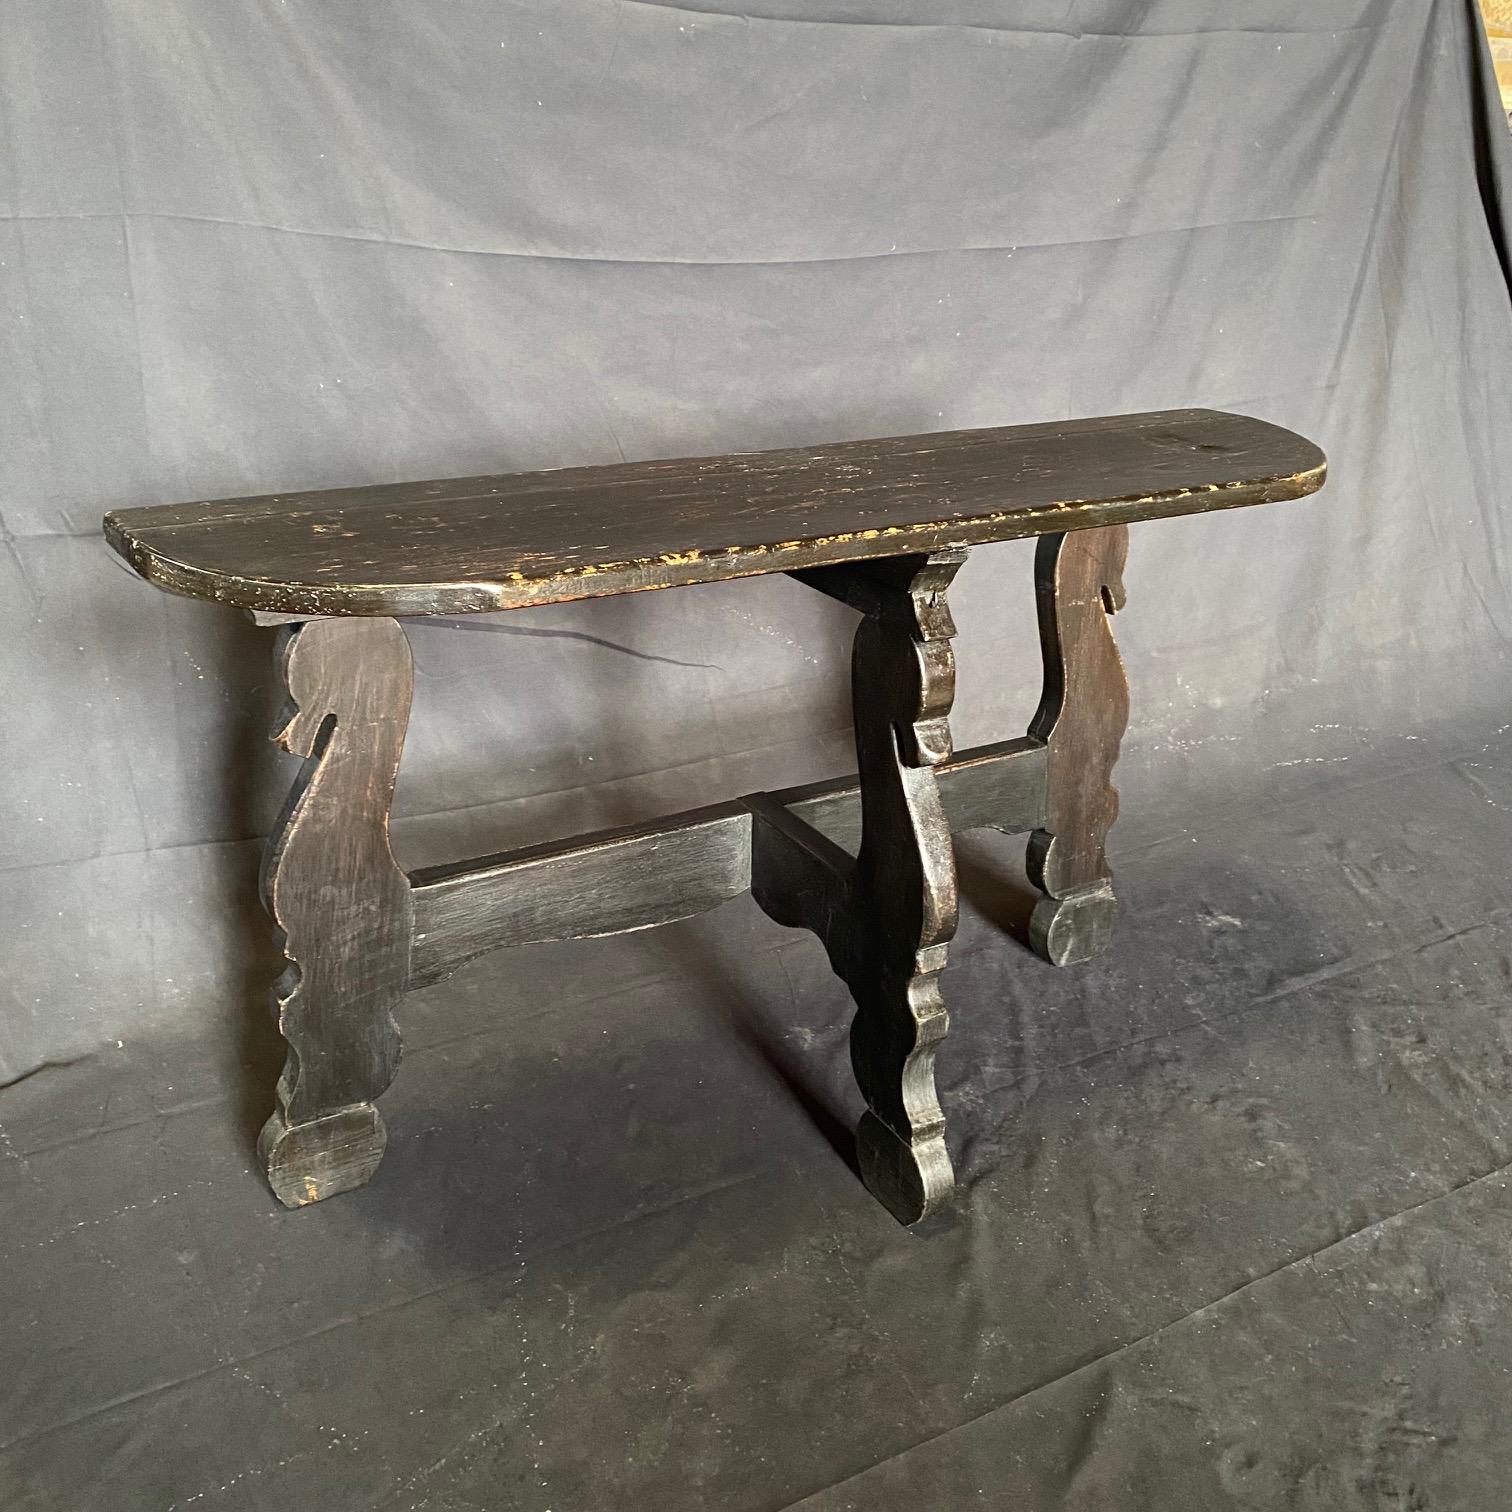 An exceptional pair of 19th century Spanish Baroque demilune tables or consoles in ebony painted walnut wood with elaborated design and carved figural scroll elements on the supports. The oval tops have lovely rustic rounded edges and are supported